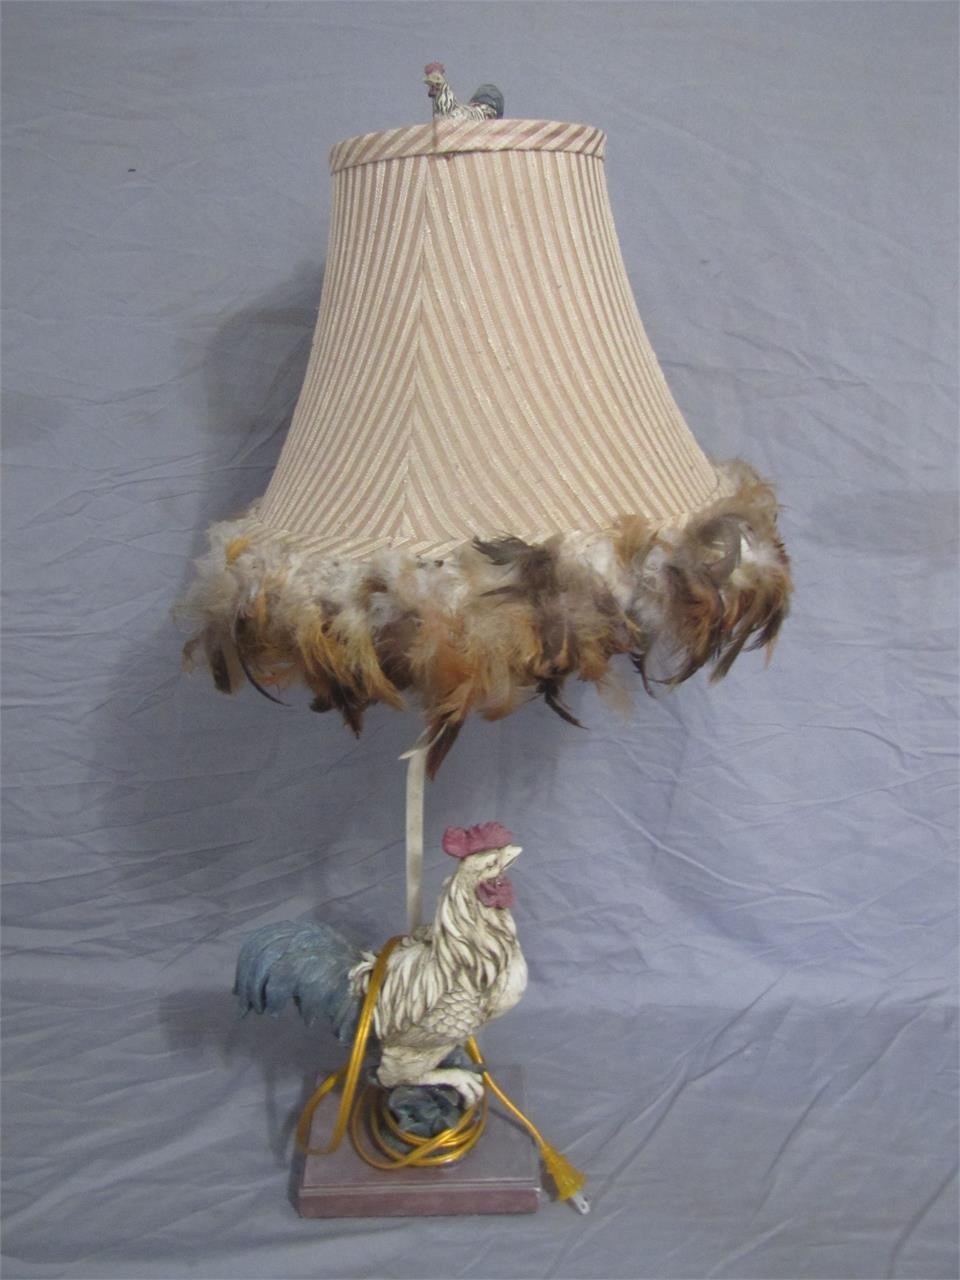 Vintage Rooster-Themed Lamp